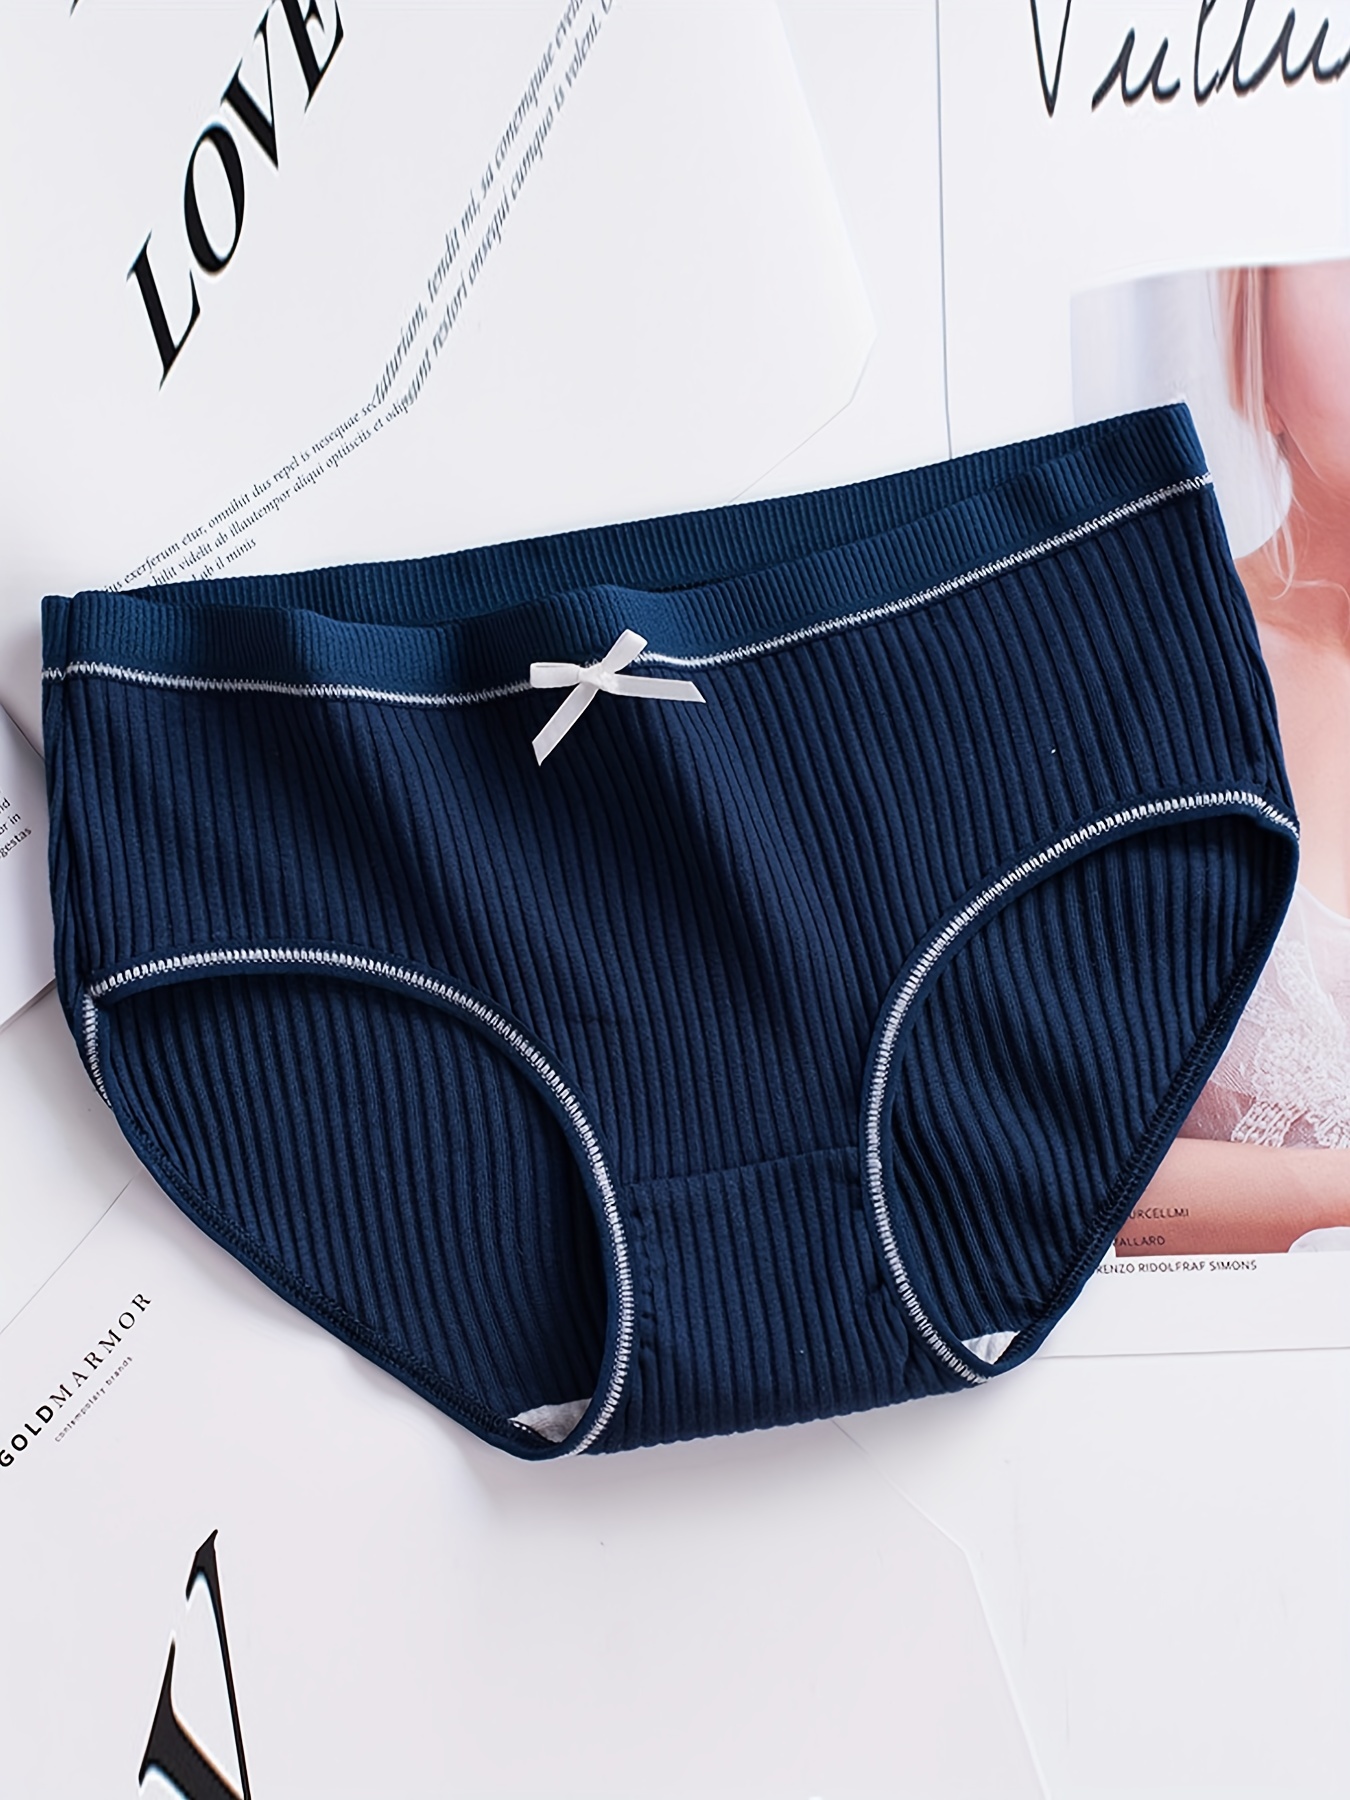 Women Lovely Cute Underwear Stripes Bow Cotton Briefs Panties Hipster  Underpants